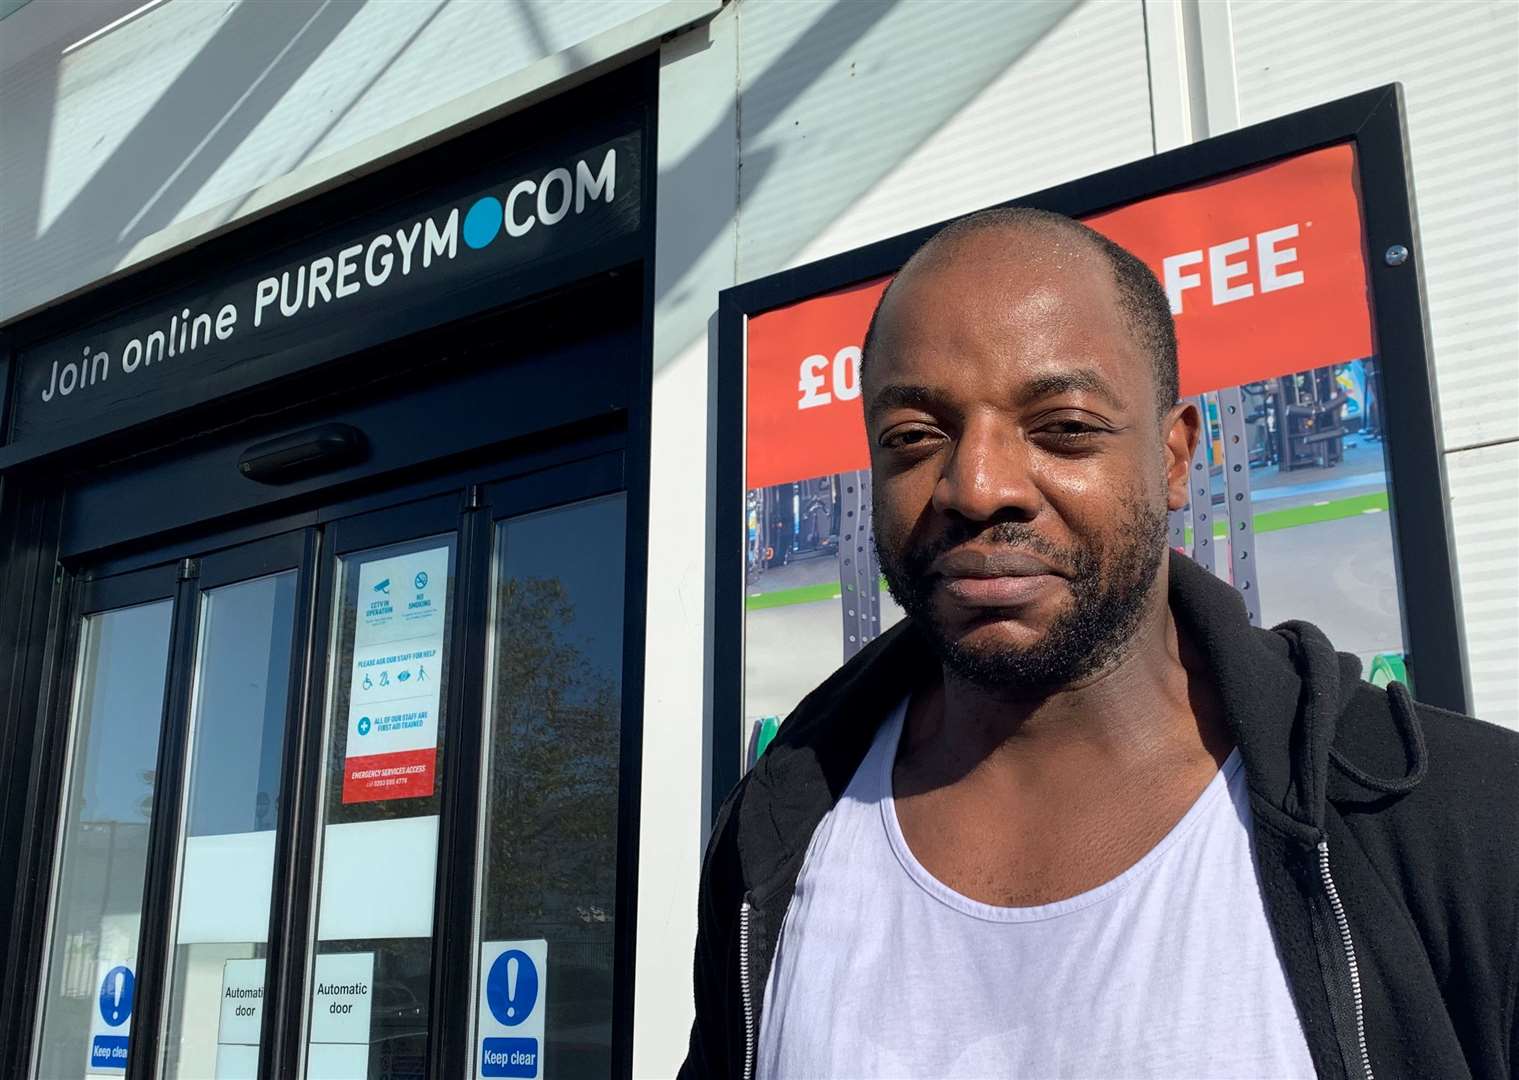 Kay Kibala can see why establishments such as PureGym Canterbury are banning or restricting filming